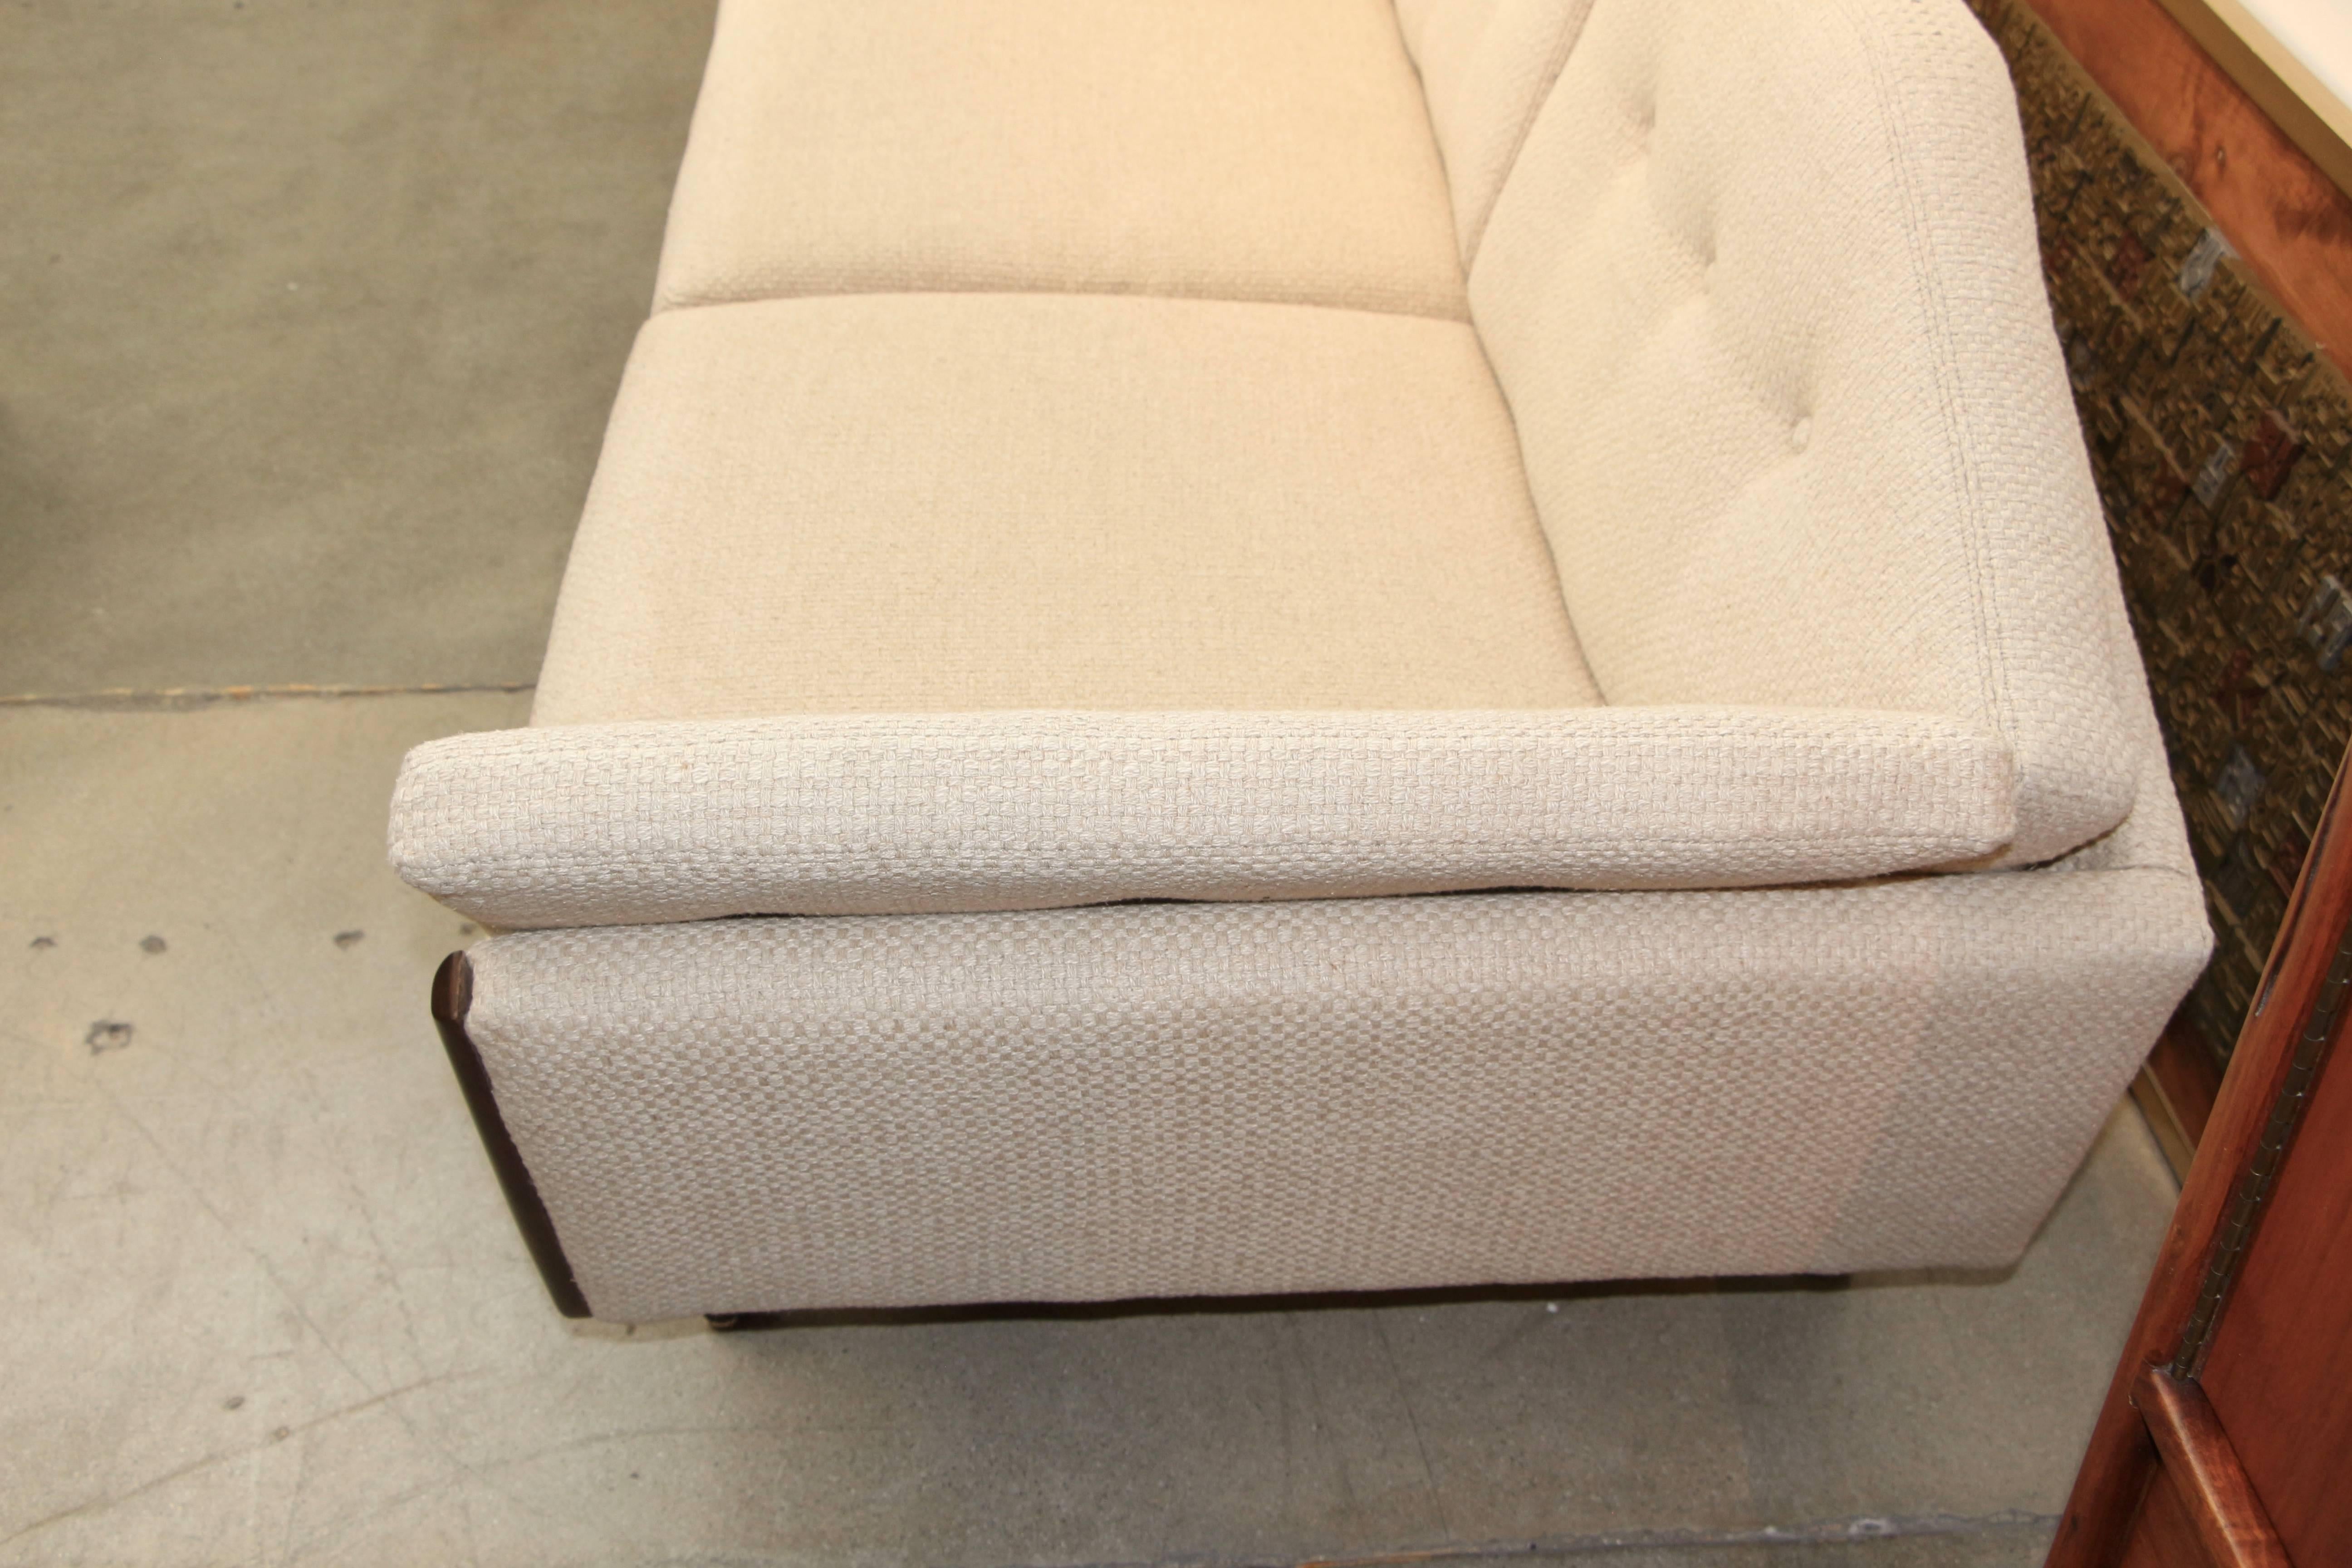 An elegant angled walnut trimmed sofa. We bought and believe it has recently been re-upholstered in a wool weave fabric. There are a couple of spots, the worst of which is pictured. The walnut front has some areas that have been touched up.
Please